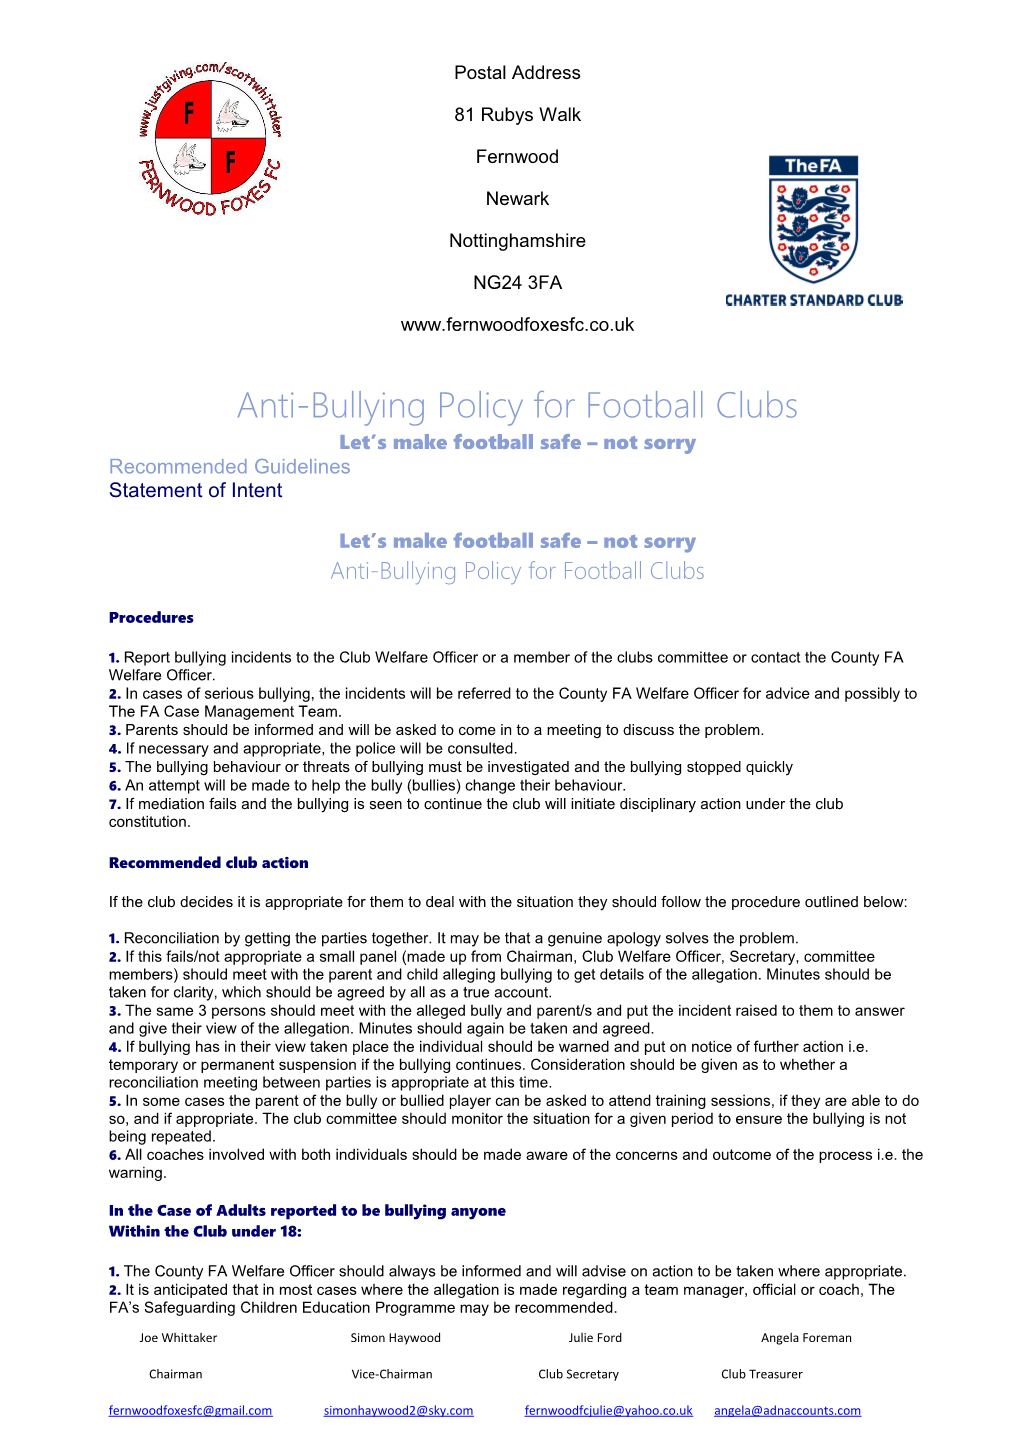 Anti-Bullying Policy for Football Clubs